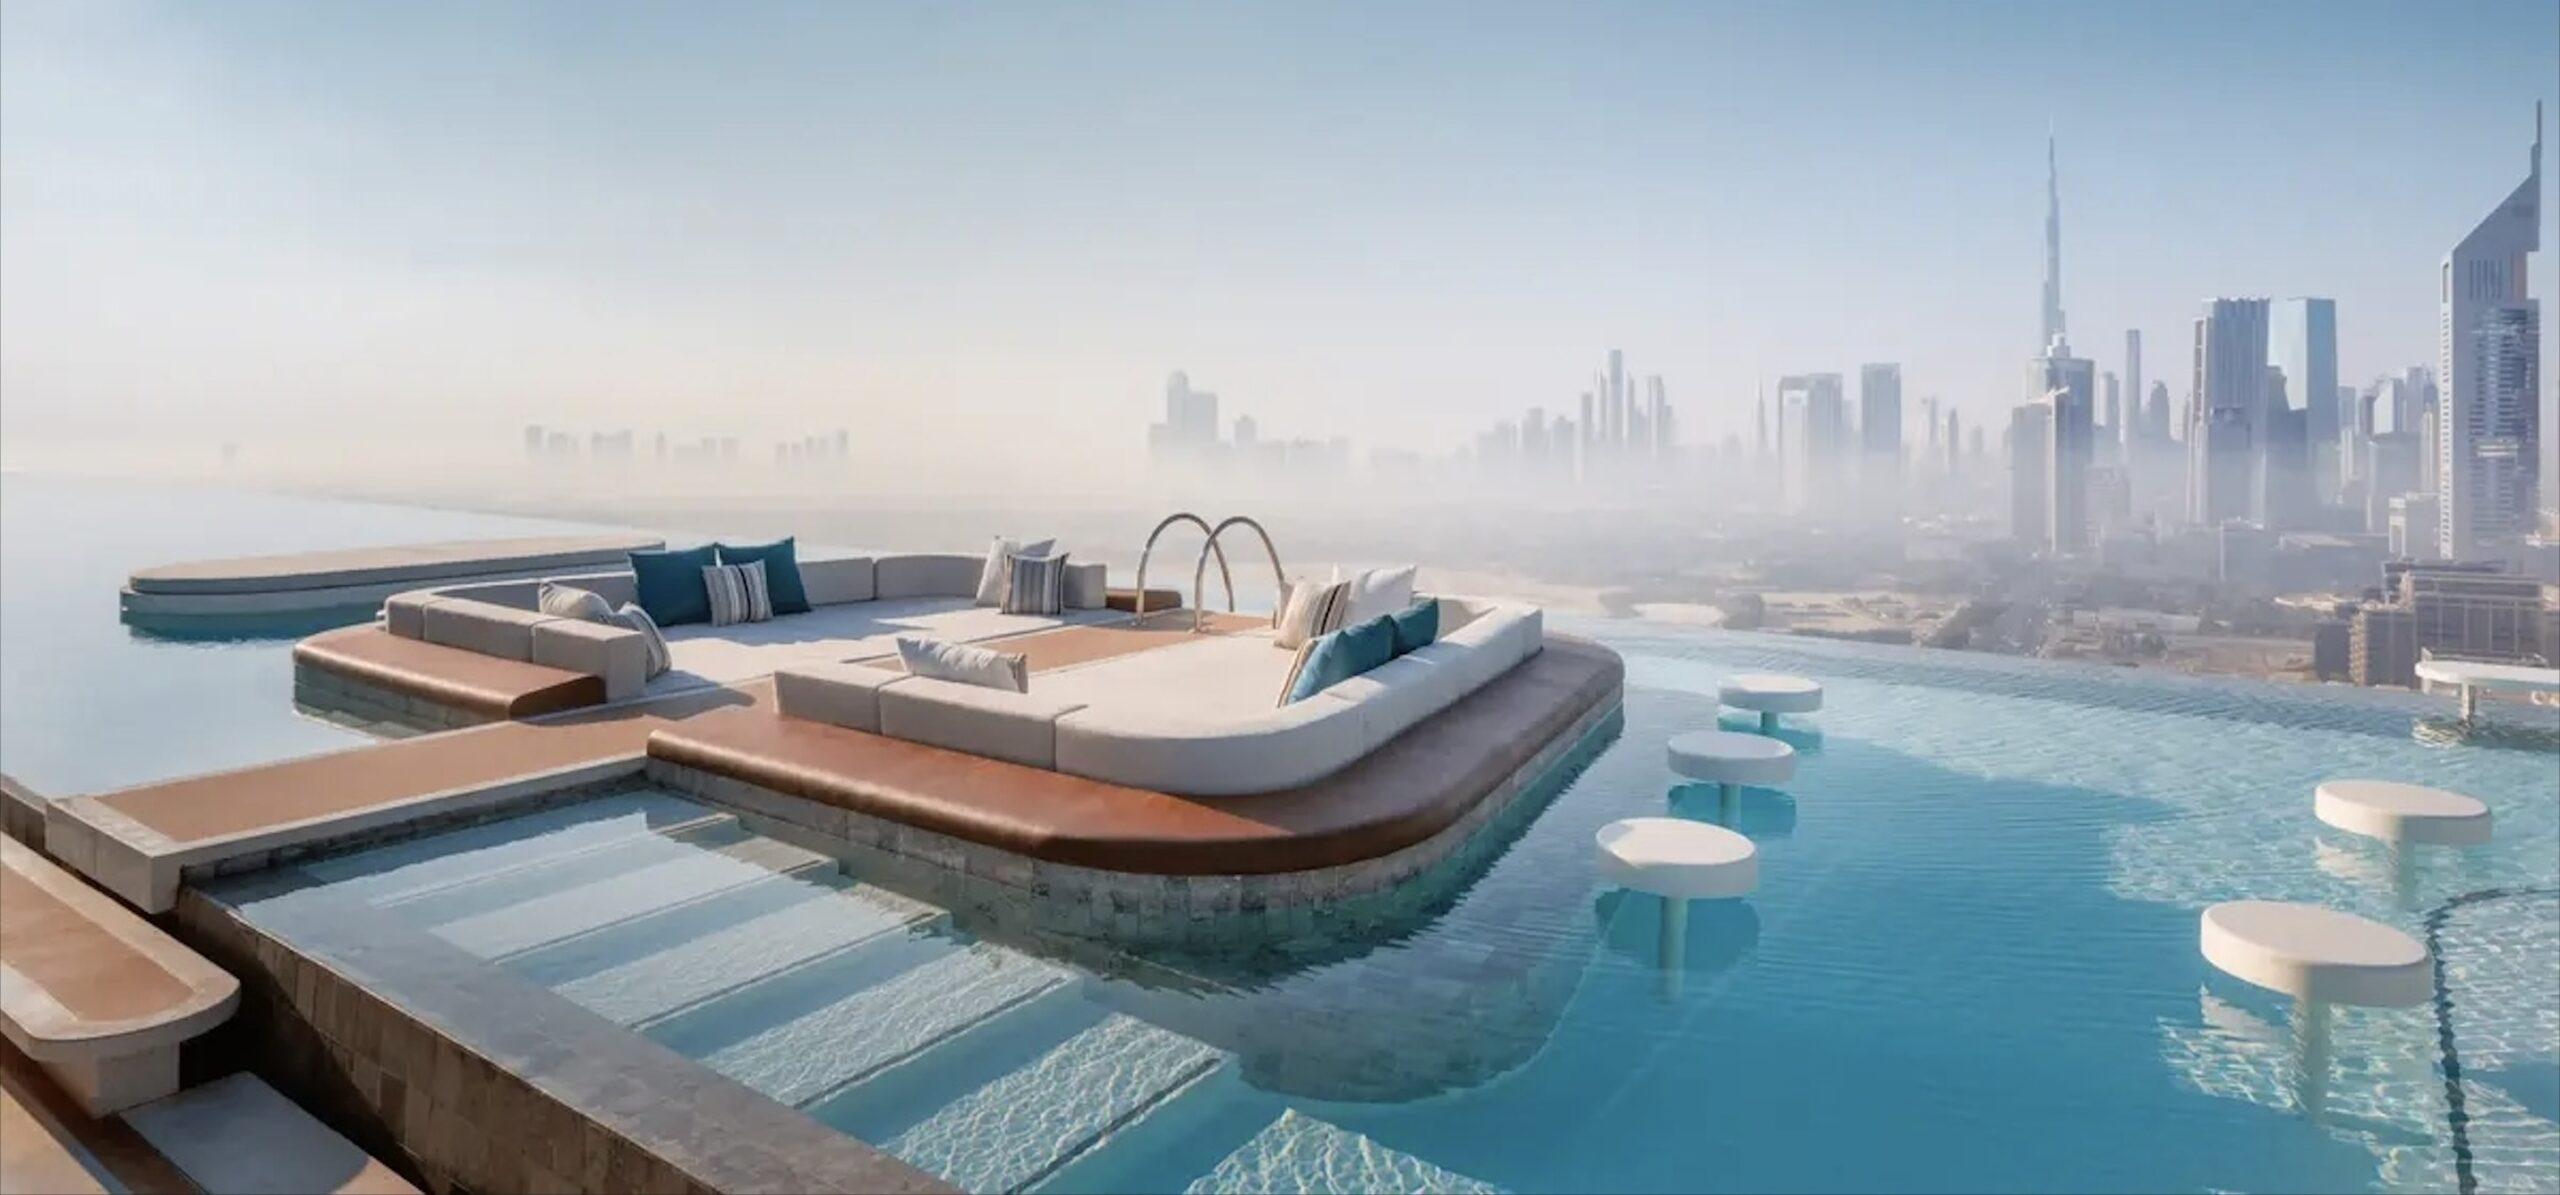 Tapasake Review: Dive into the UAE’s longest suspended infinity pool-image